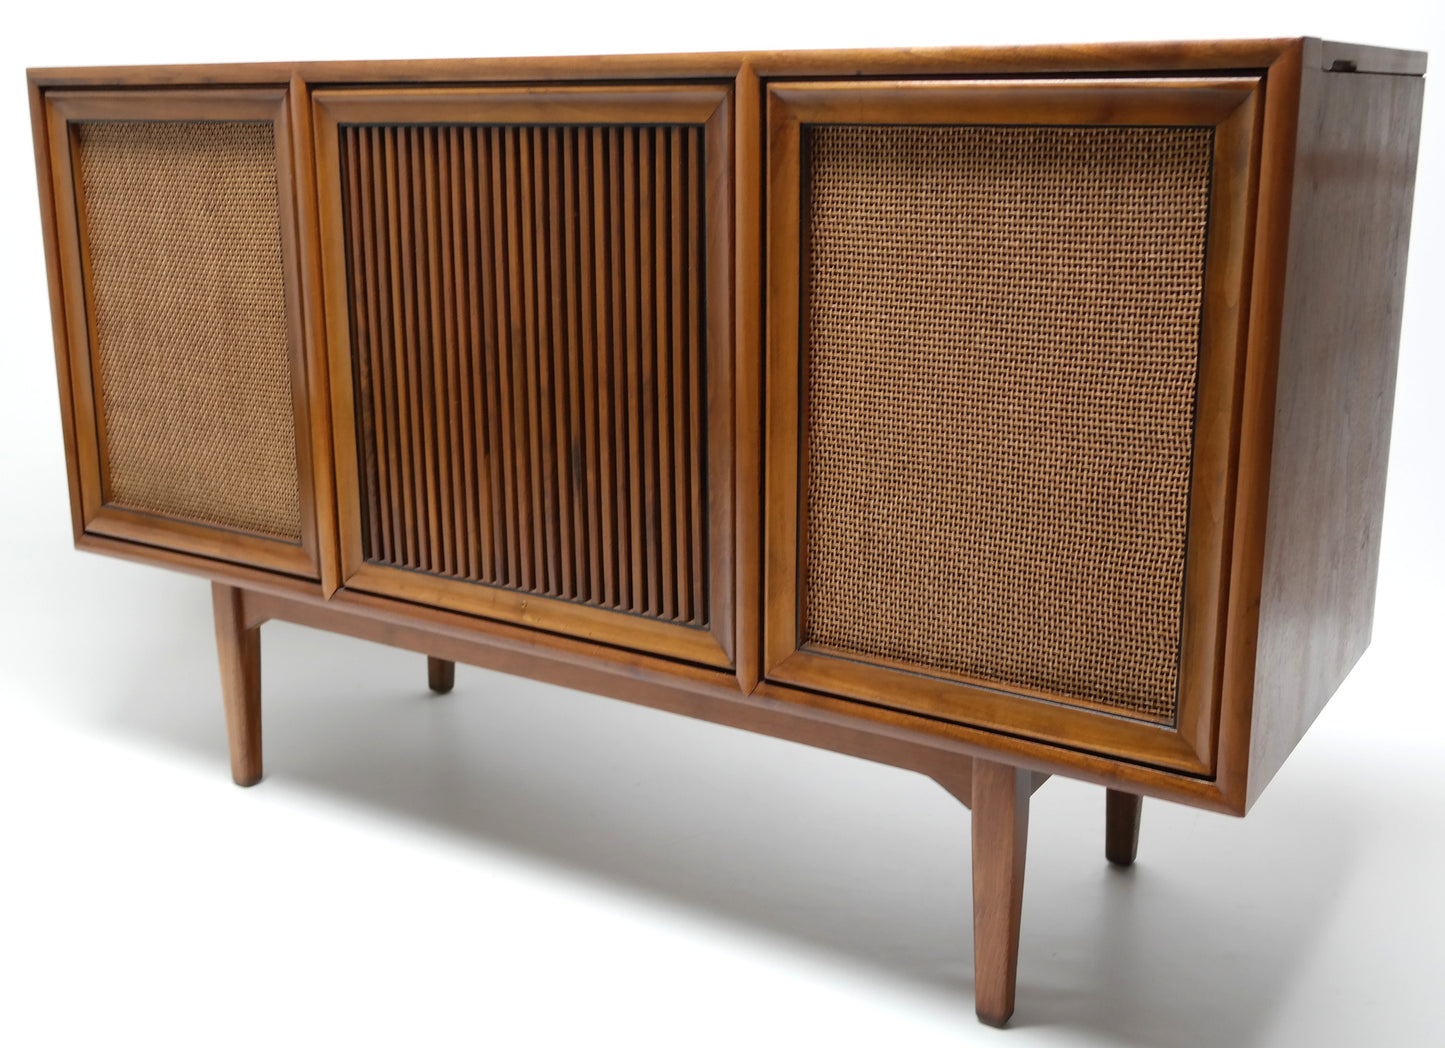 Mid Century Modern Stereo Console By Motorola Record Changer - AM/FM- Tuner - Bluetooth The Vintedge Co.